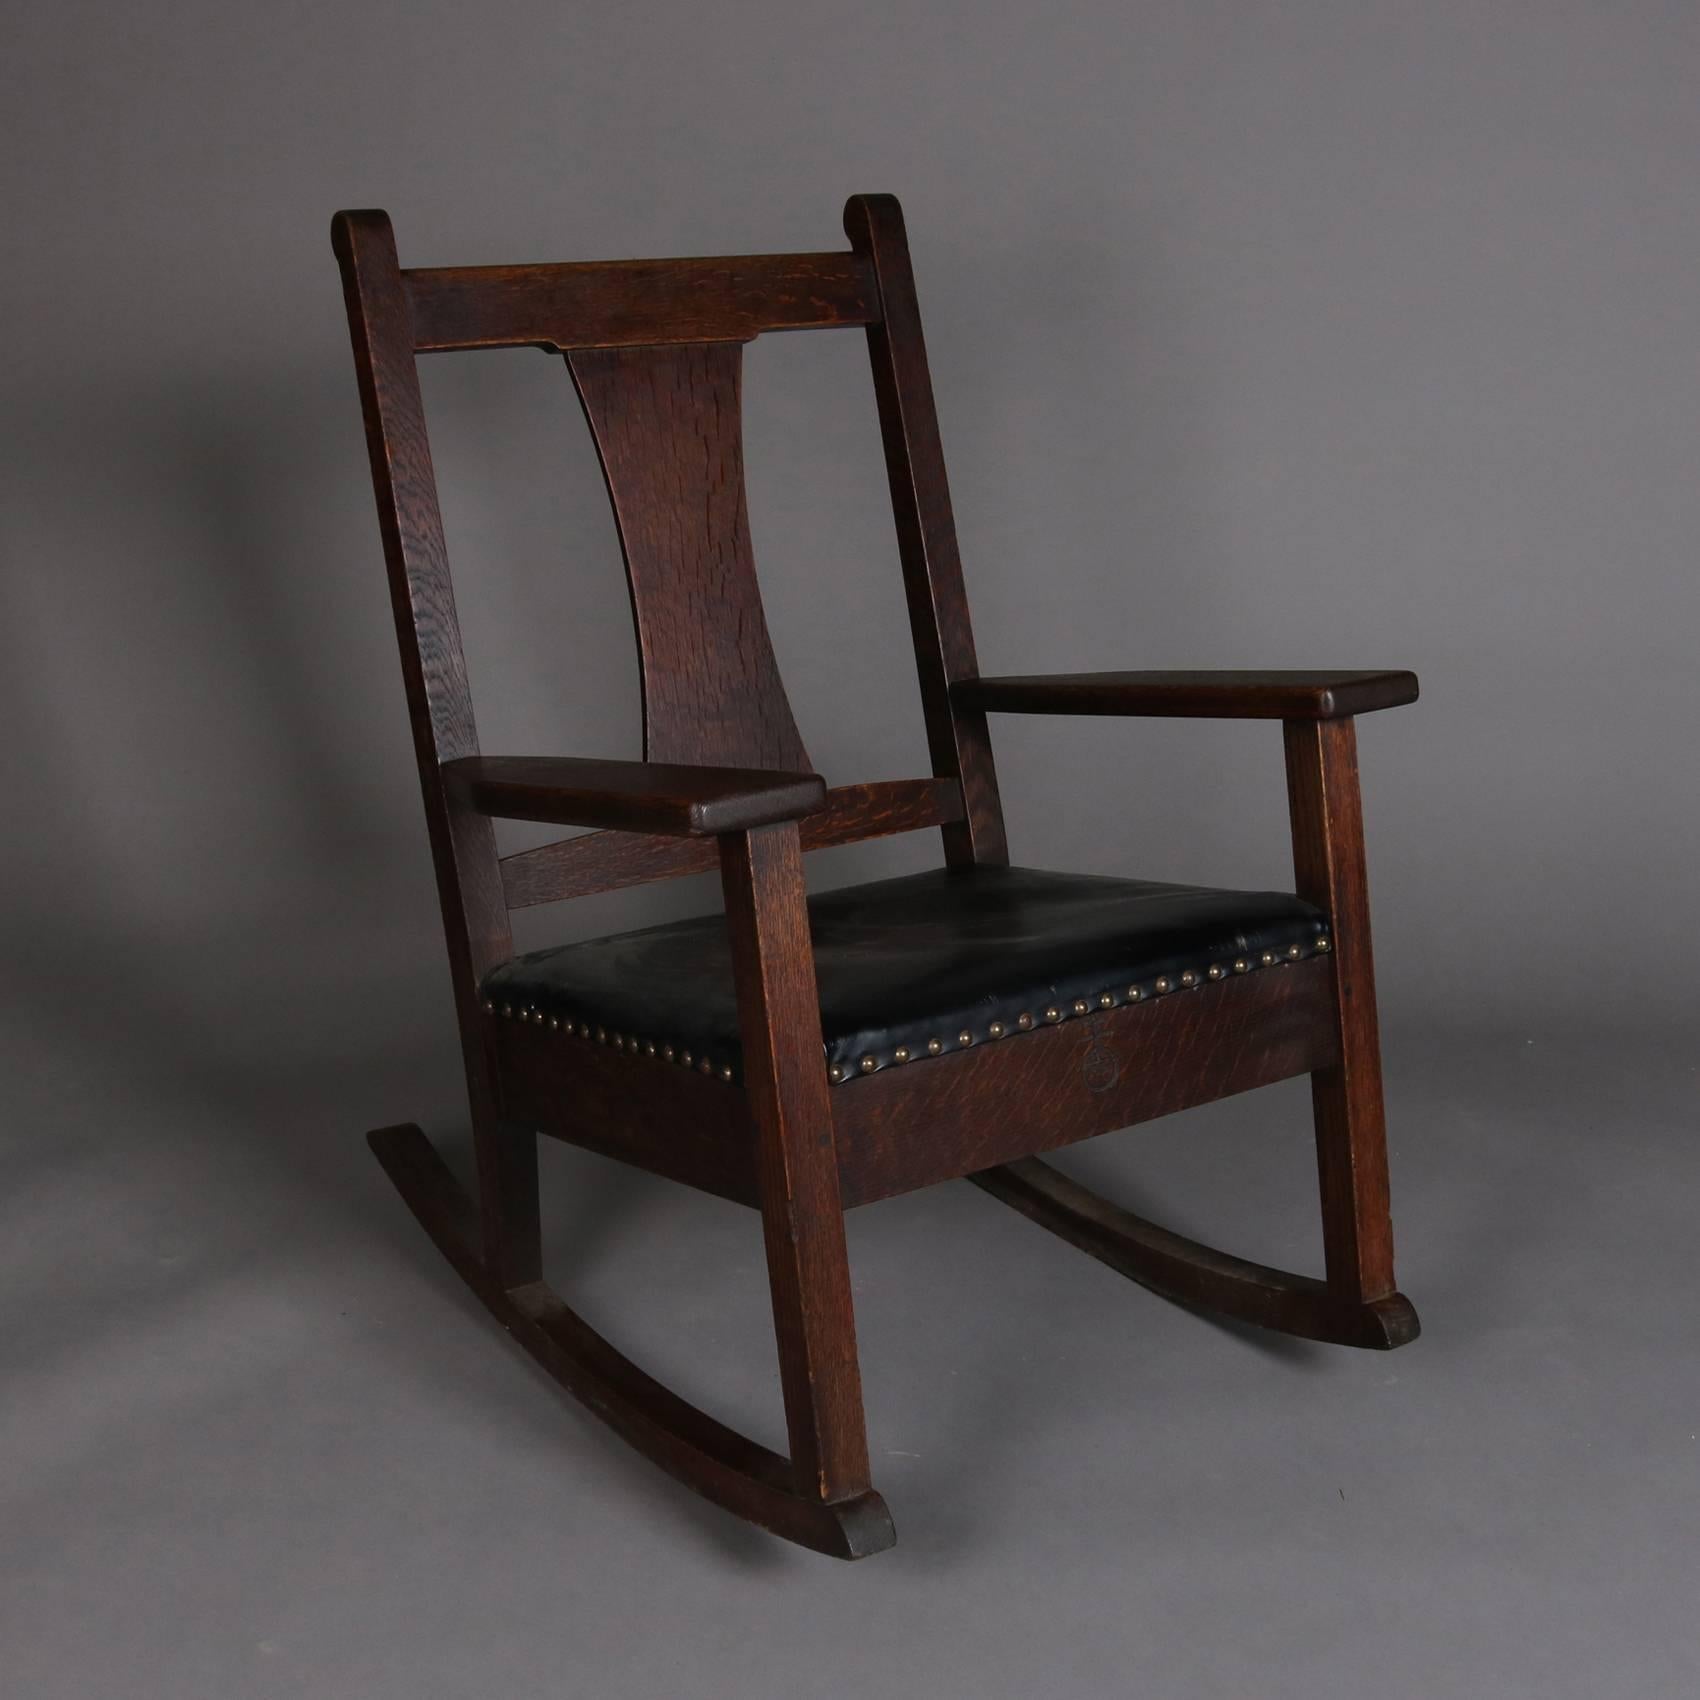 Antique Arts & Crafts Mission Oak Rocking Chair by Roycroft, Signed 2